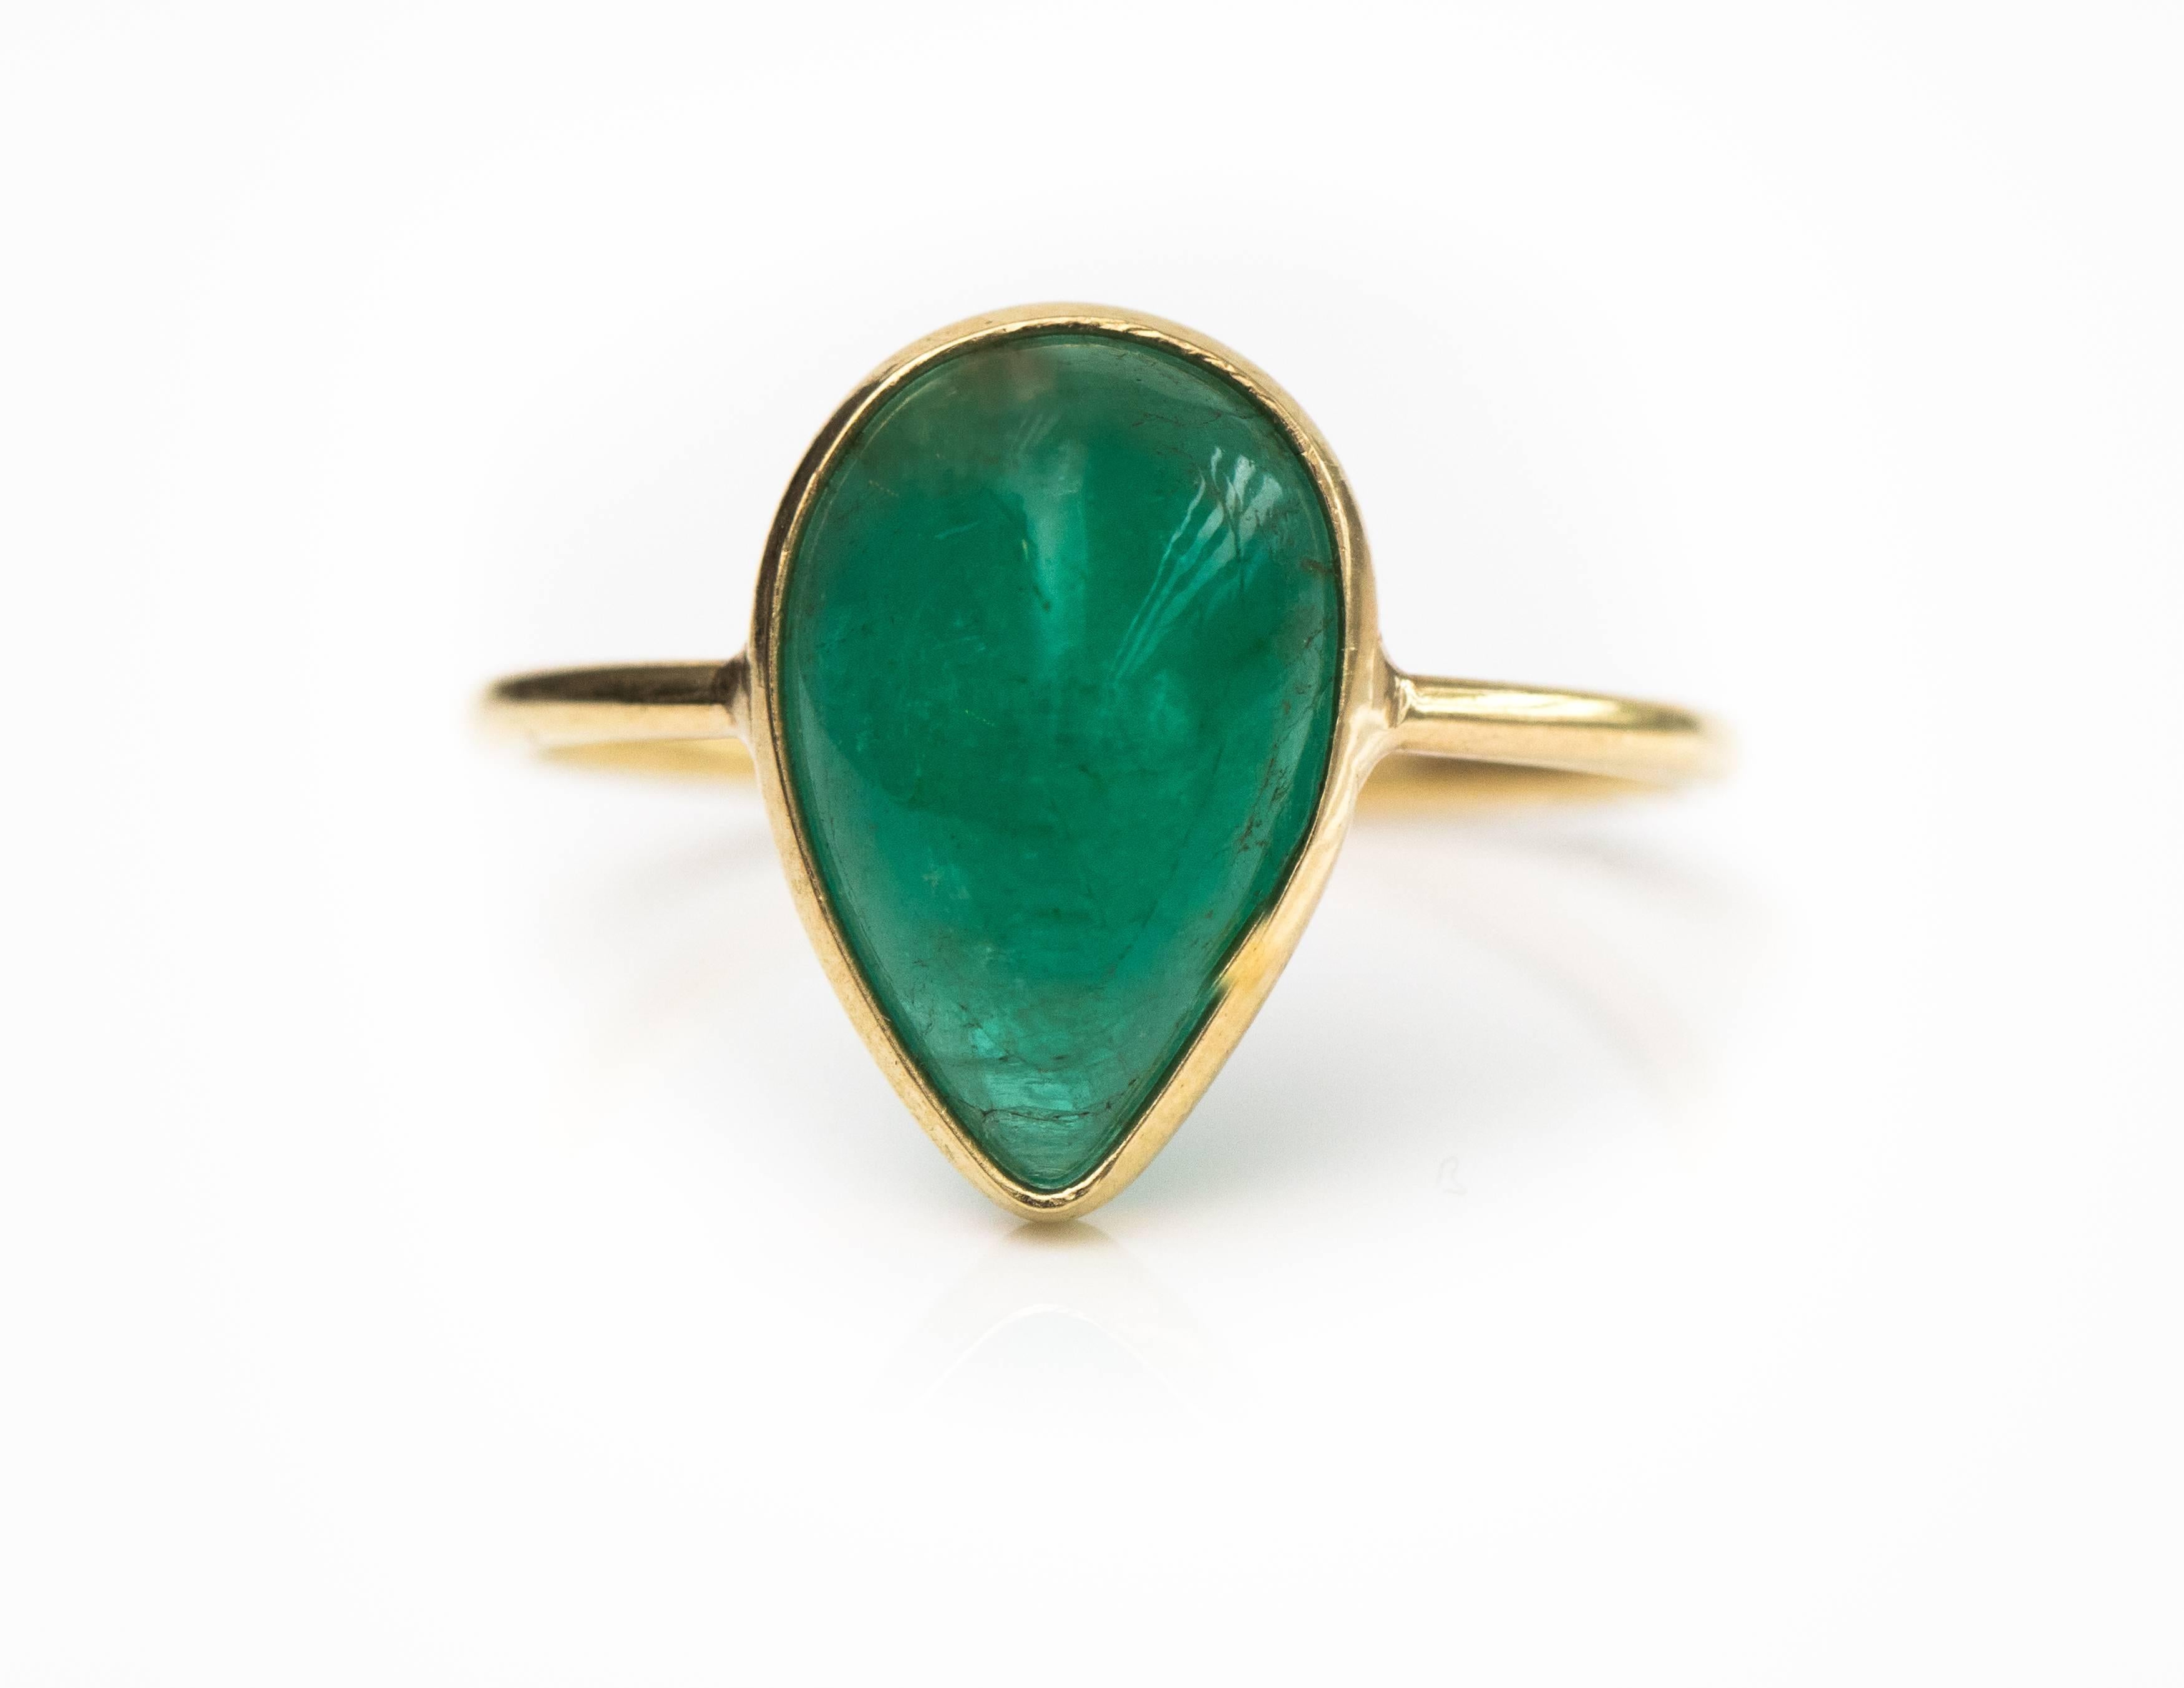 2.2 Carat Pear cut South American Emerald Ring - 18 Karat Yellow Gold, Emerald

Features a Pear cut Emerald cabochon bezel set in 18 Karat Yellow Gold. This South American Emerald has a deep, rich green color. The unusually shaped Cabochon has a